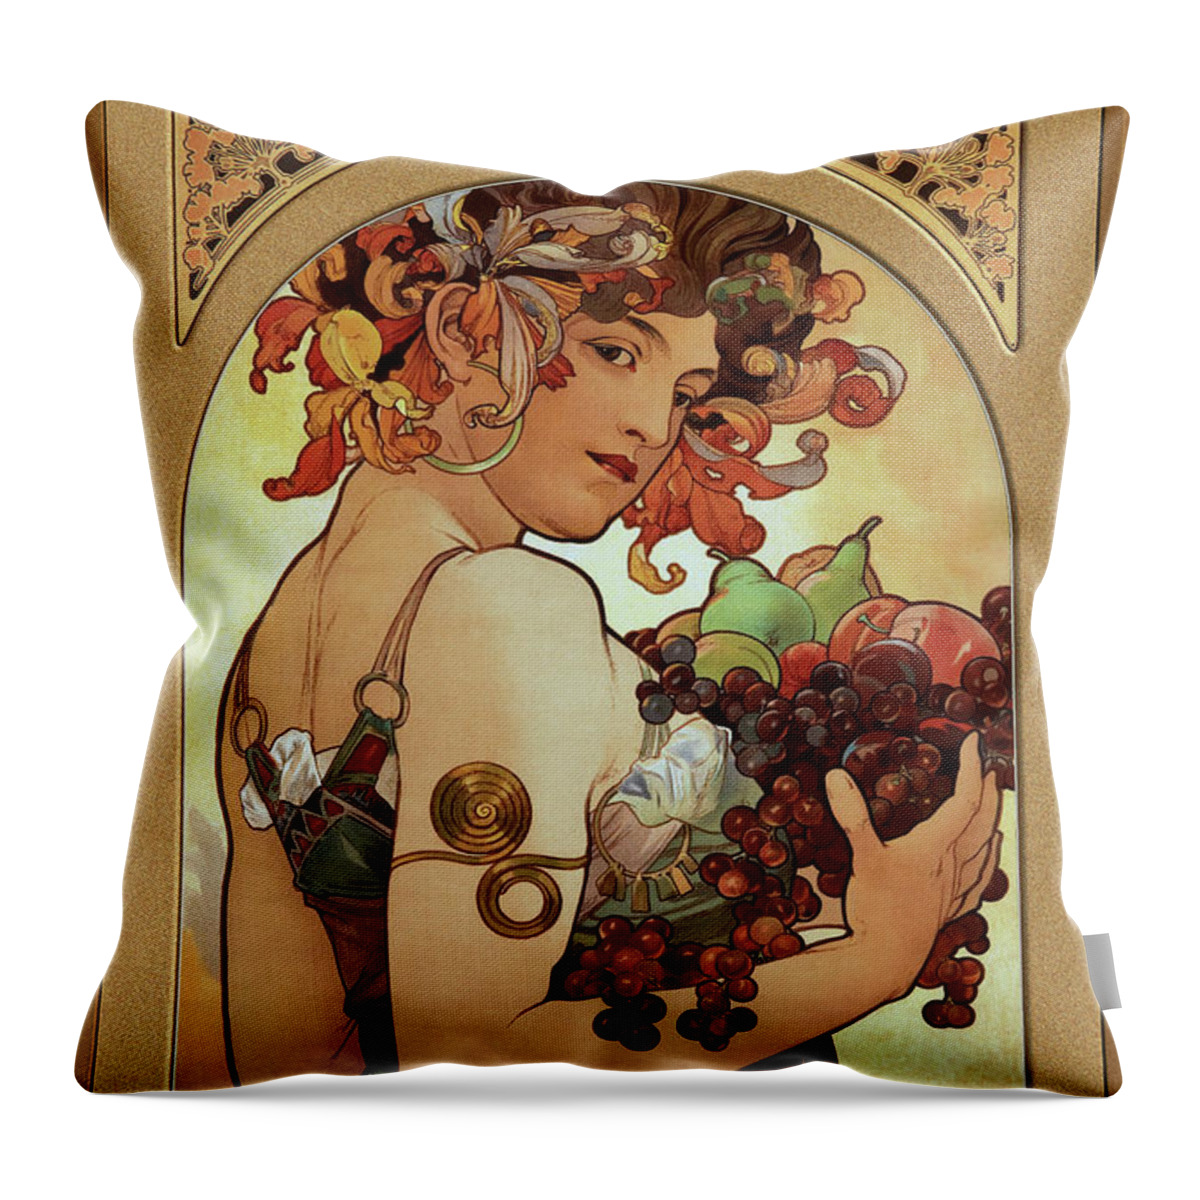 Fruit Throw Pillow featuring the painting Fruit by Alphonse Mucha by Rolando Burbon